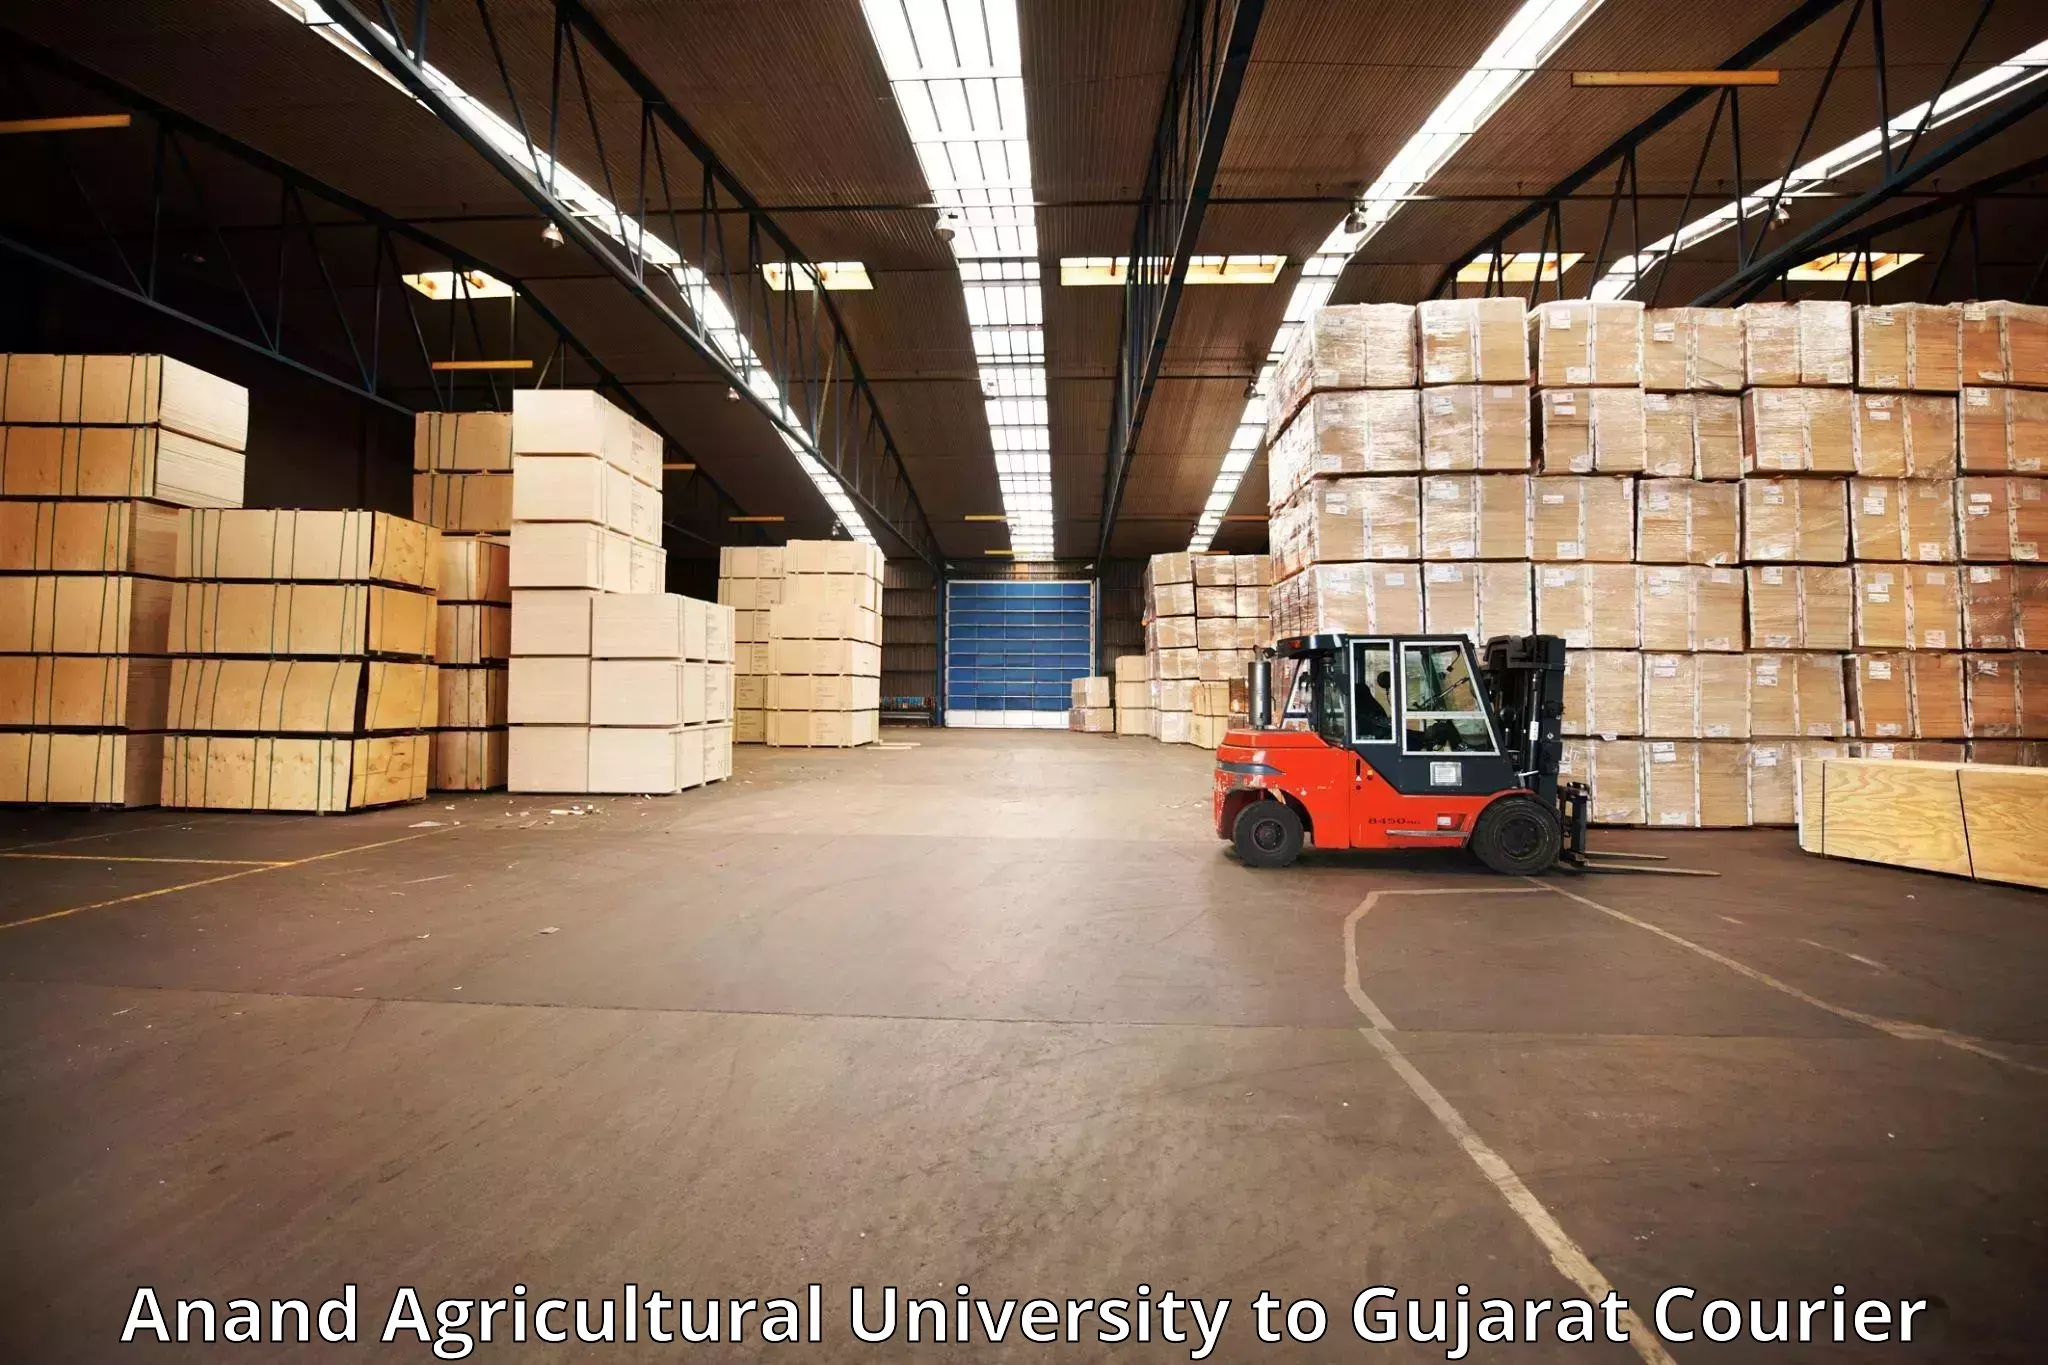 Heavy luggage shipping Anand Agricultural University to Anjar